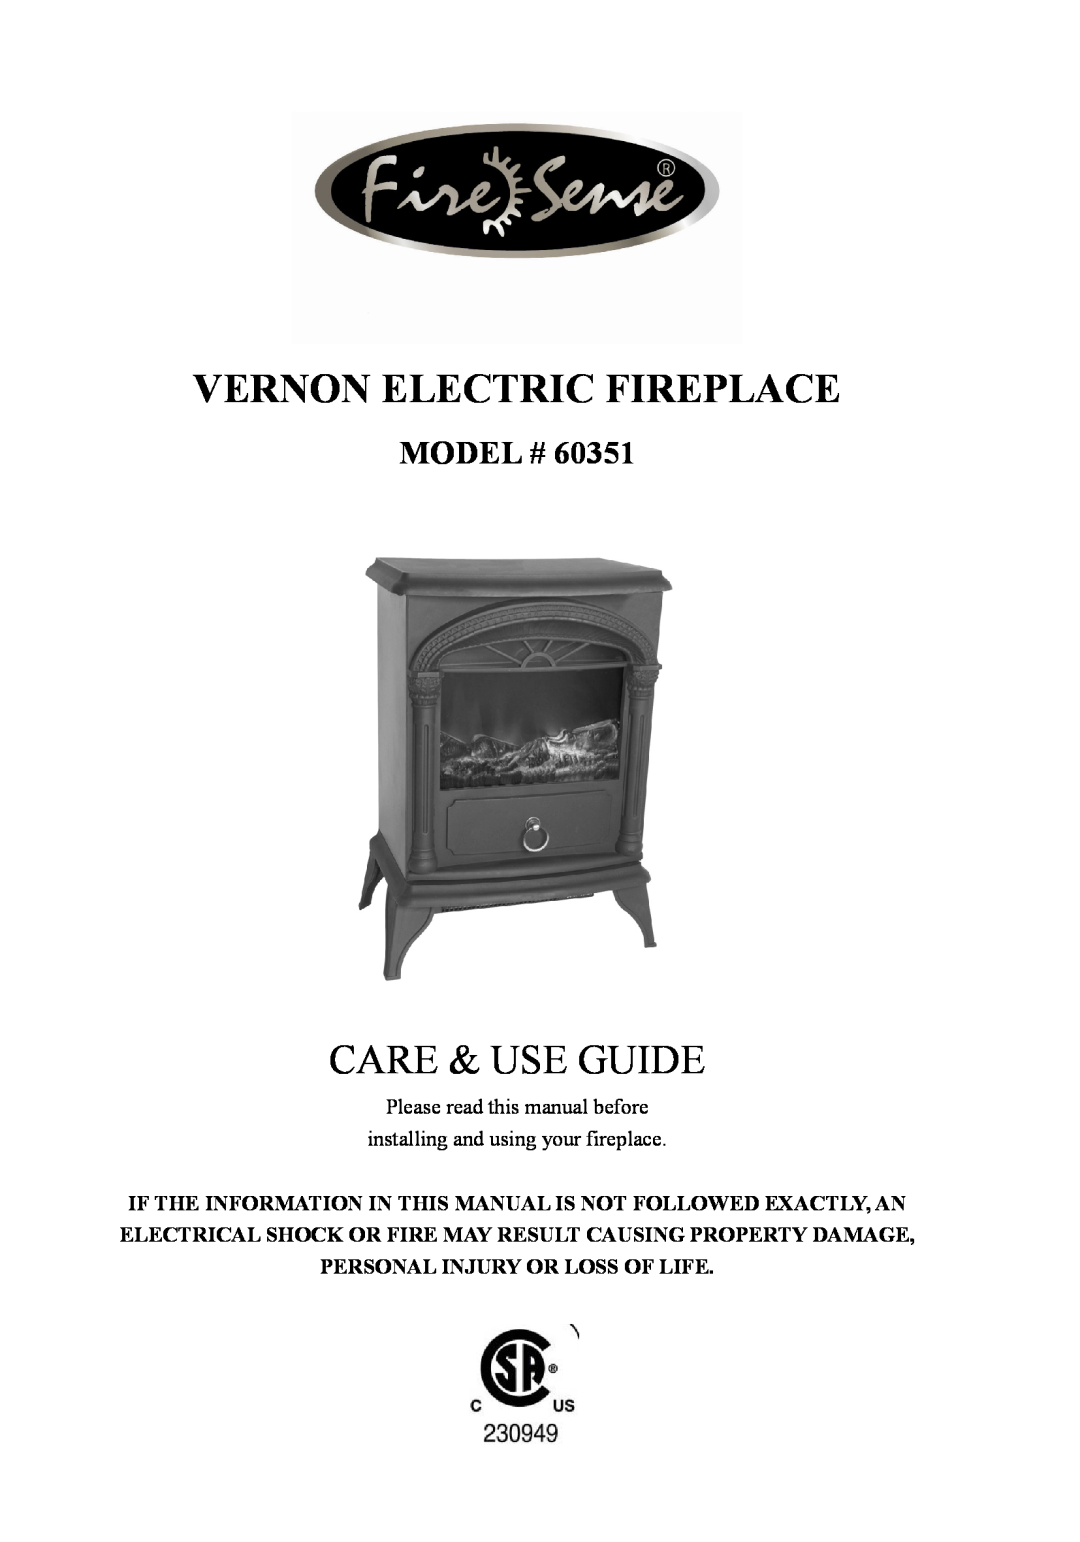 Well Traveled Living 60351 manual Vernon Electric Fireplace, Care & Use Guide, Model #, Please read this manual before 